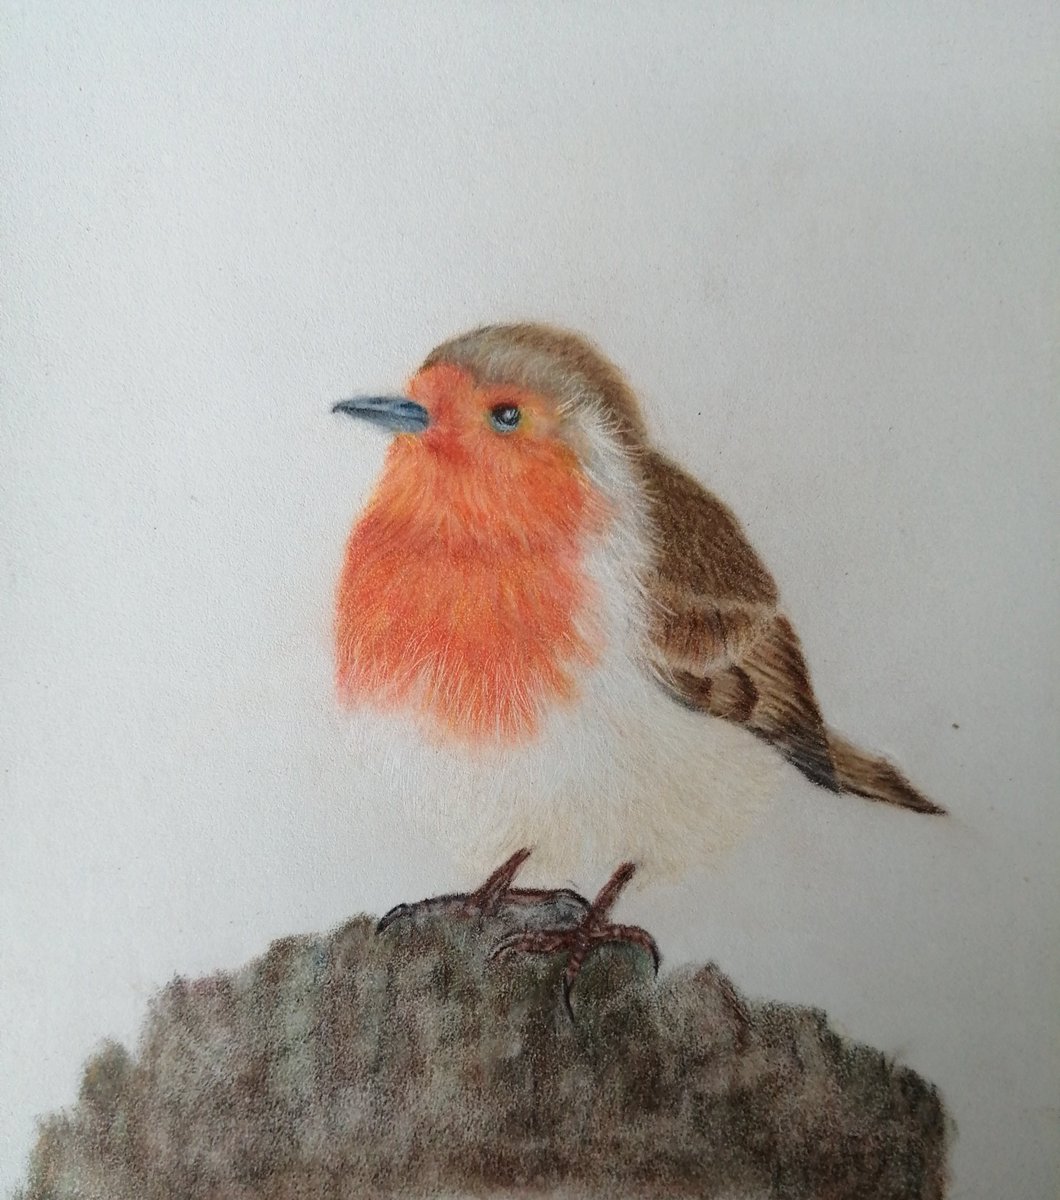 My second attempt at drawing a bird, it's this little robins turn #colouredpencil #robin